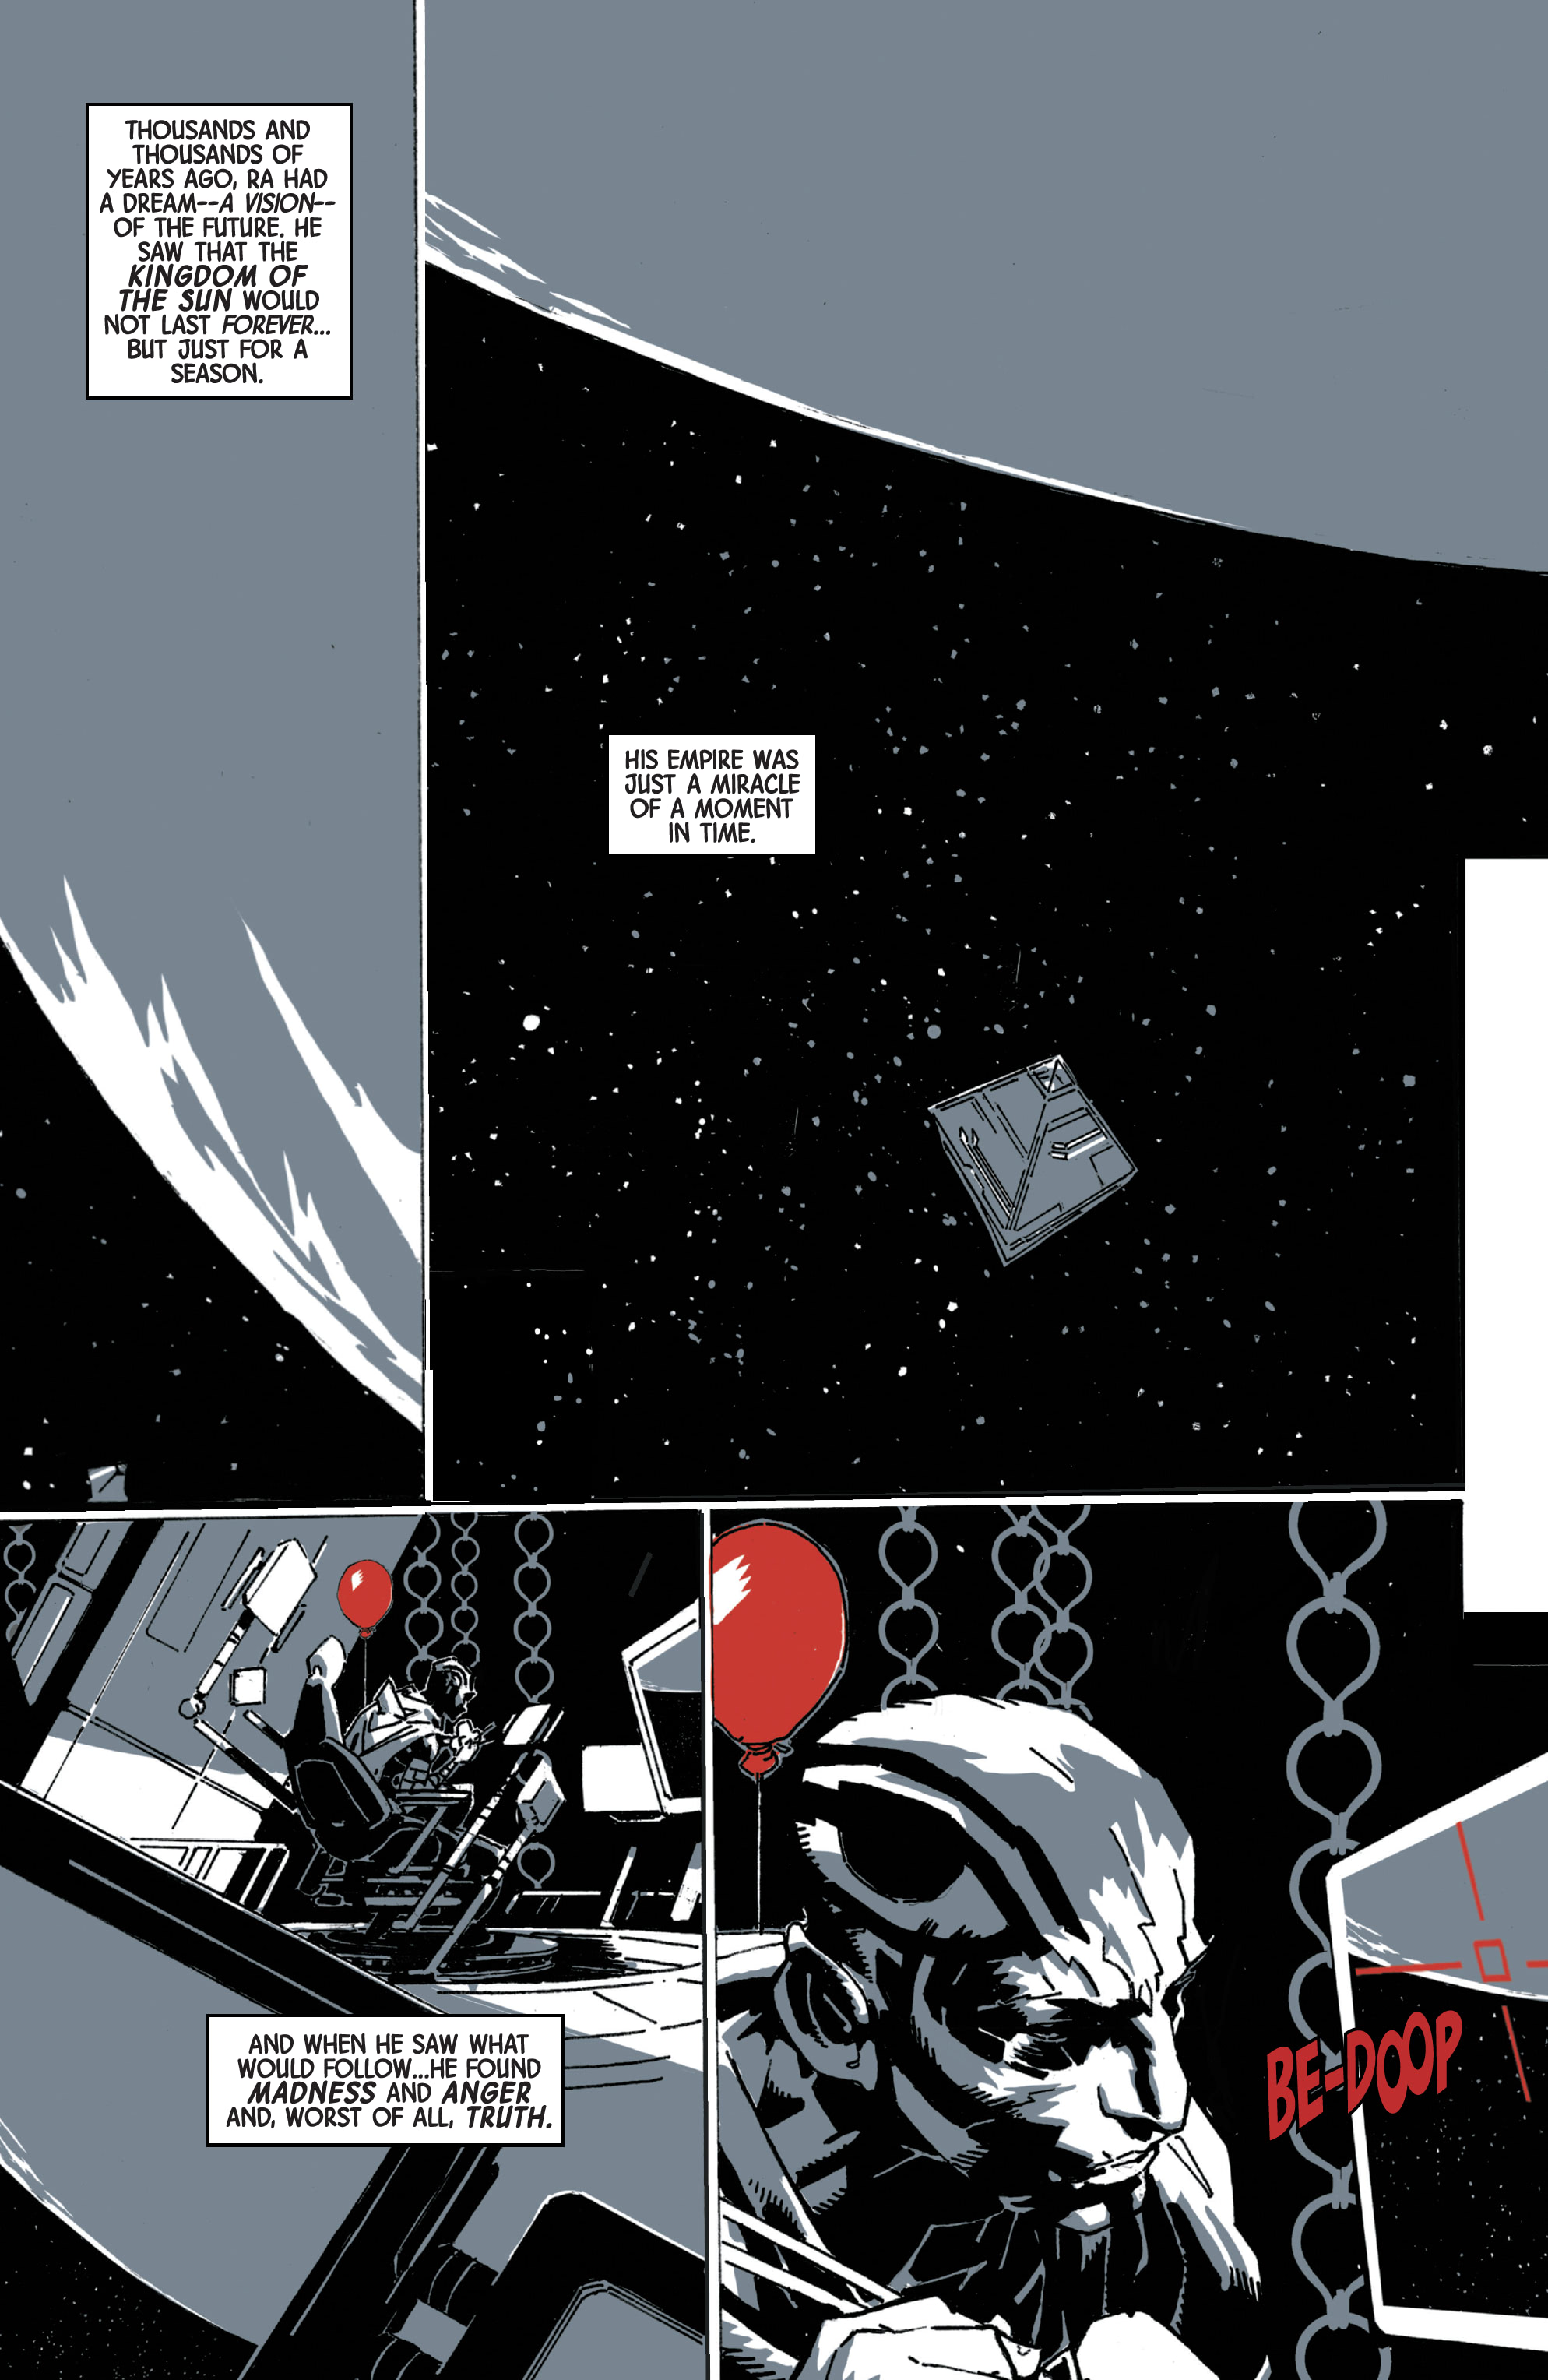 Moon Knight: Black, White, & Blood (2022-): Chapter 1 - Page 4